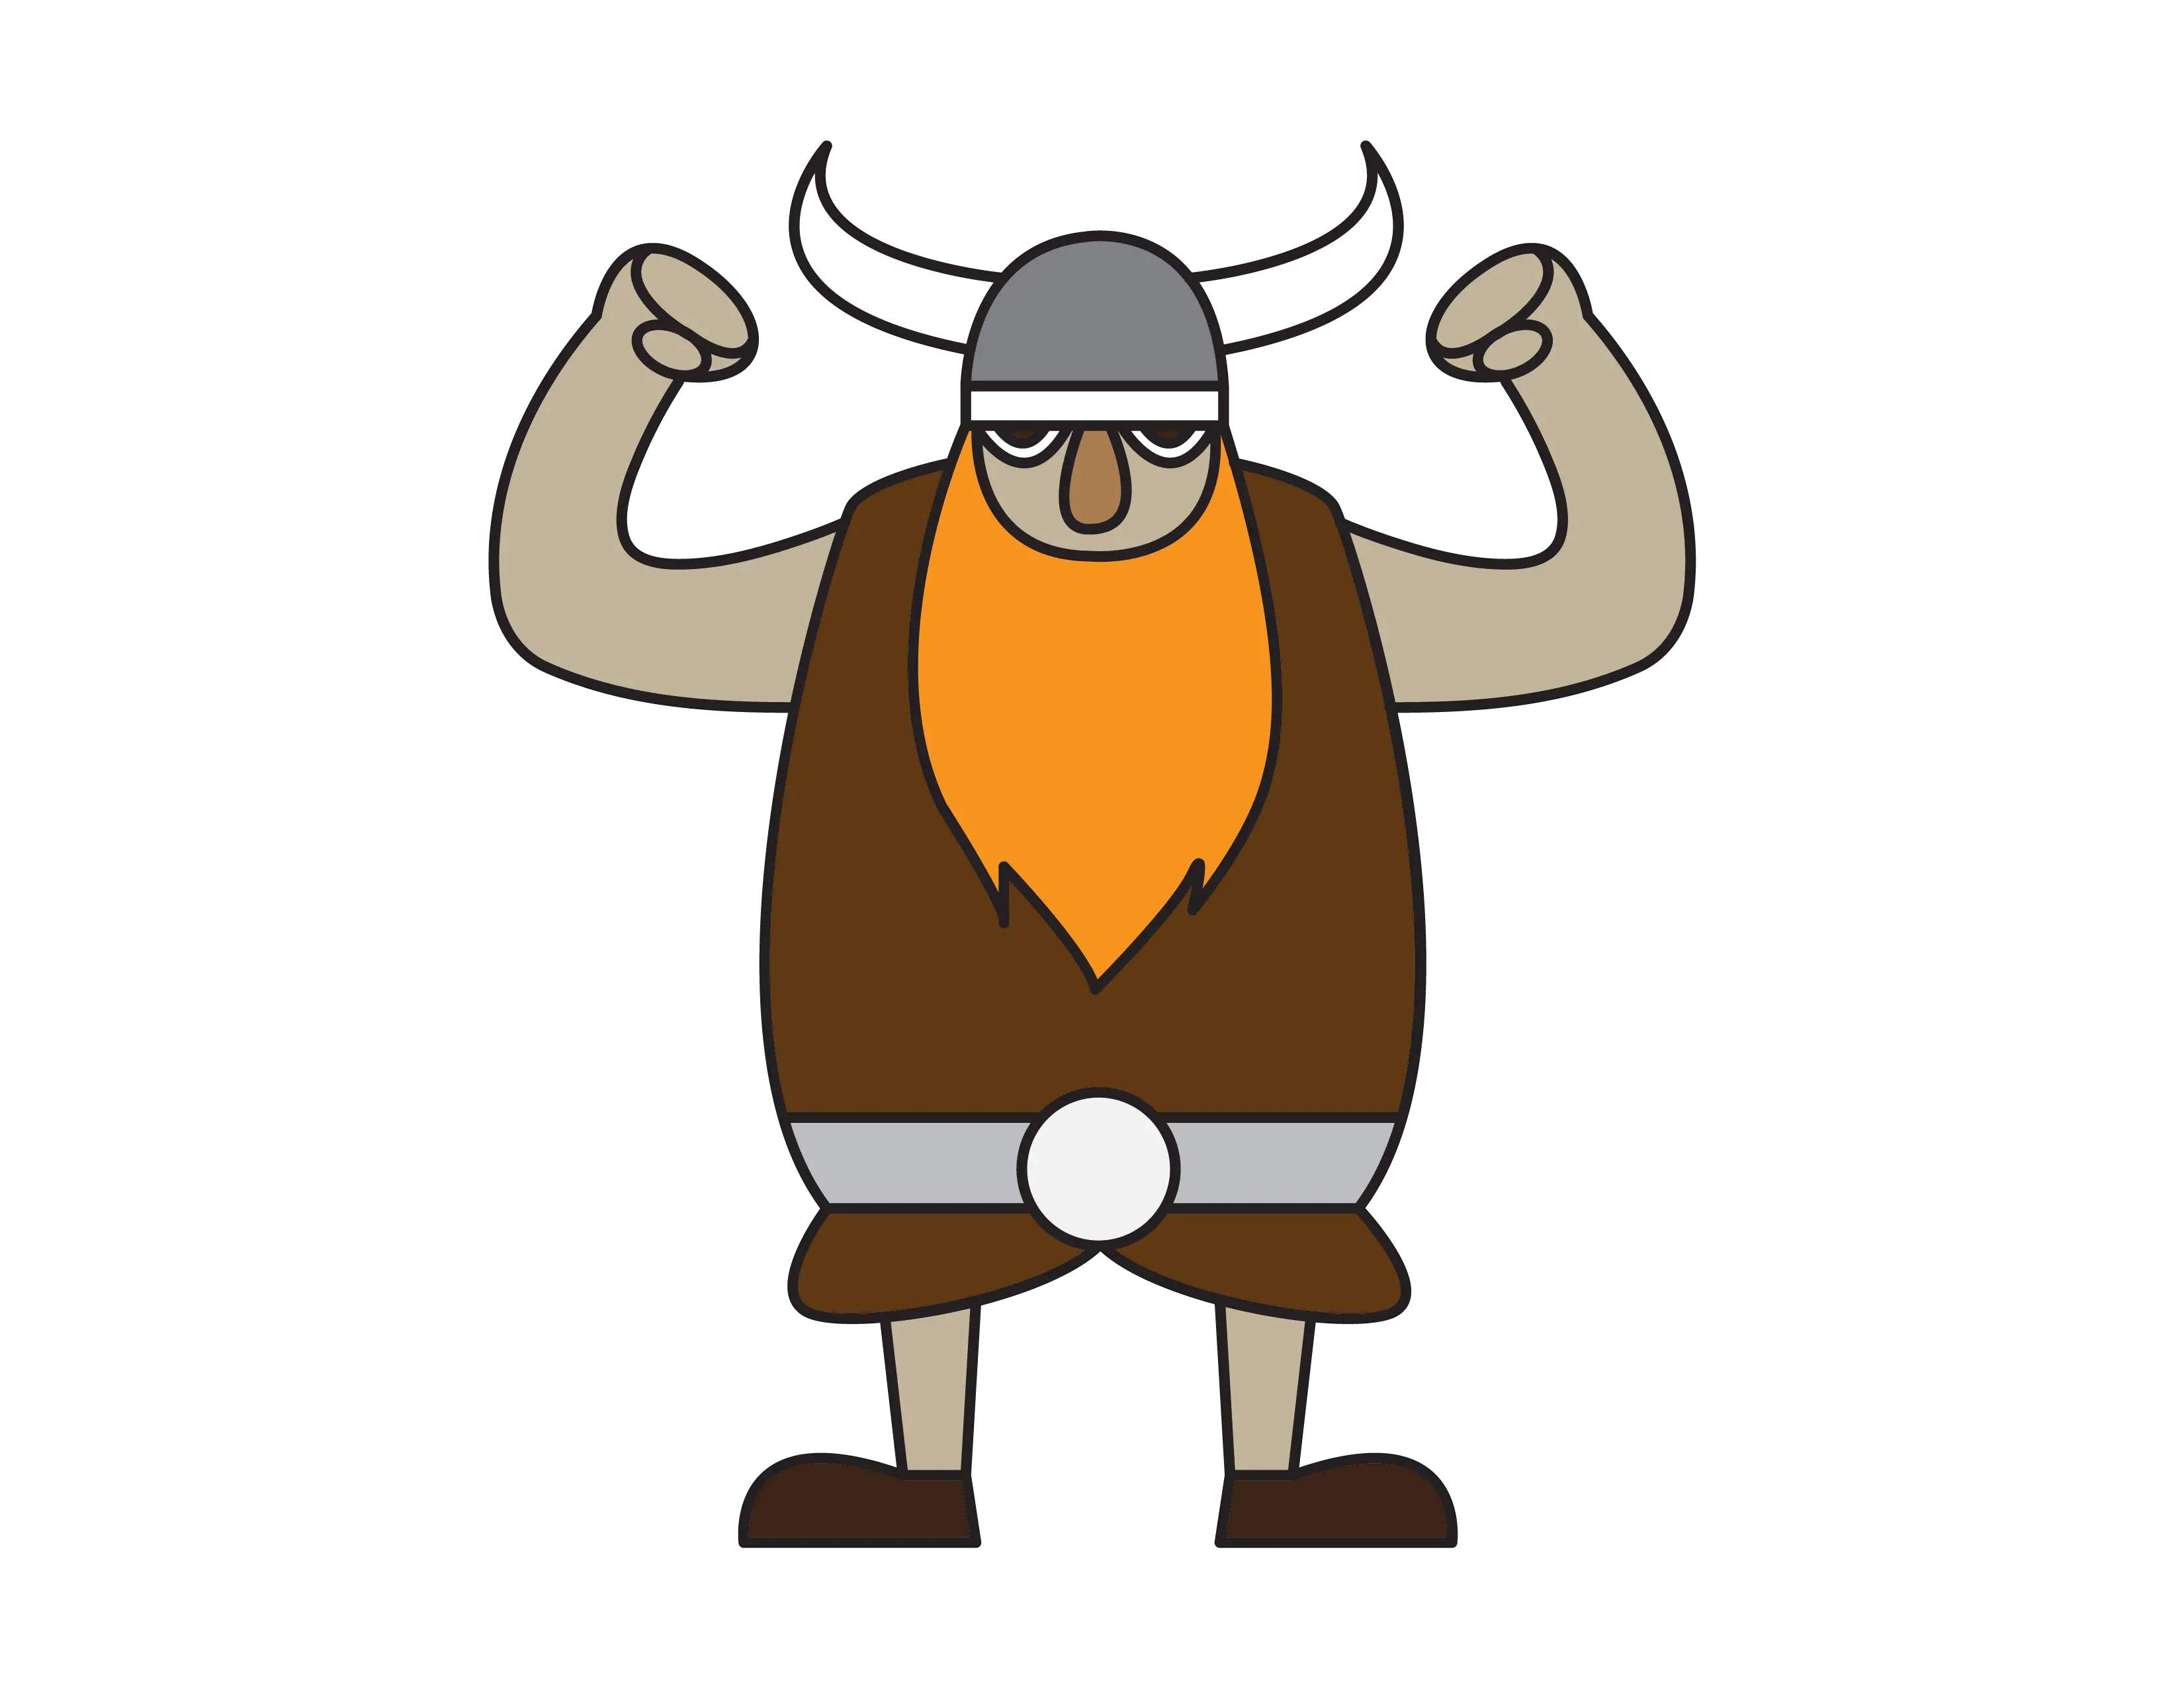 How To Draw a Funny Cartoon Viking Warrior for Young Kids Rainbow